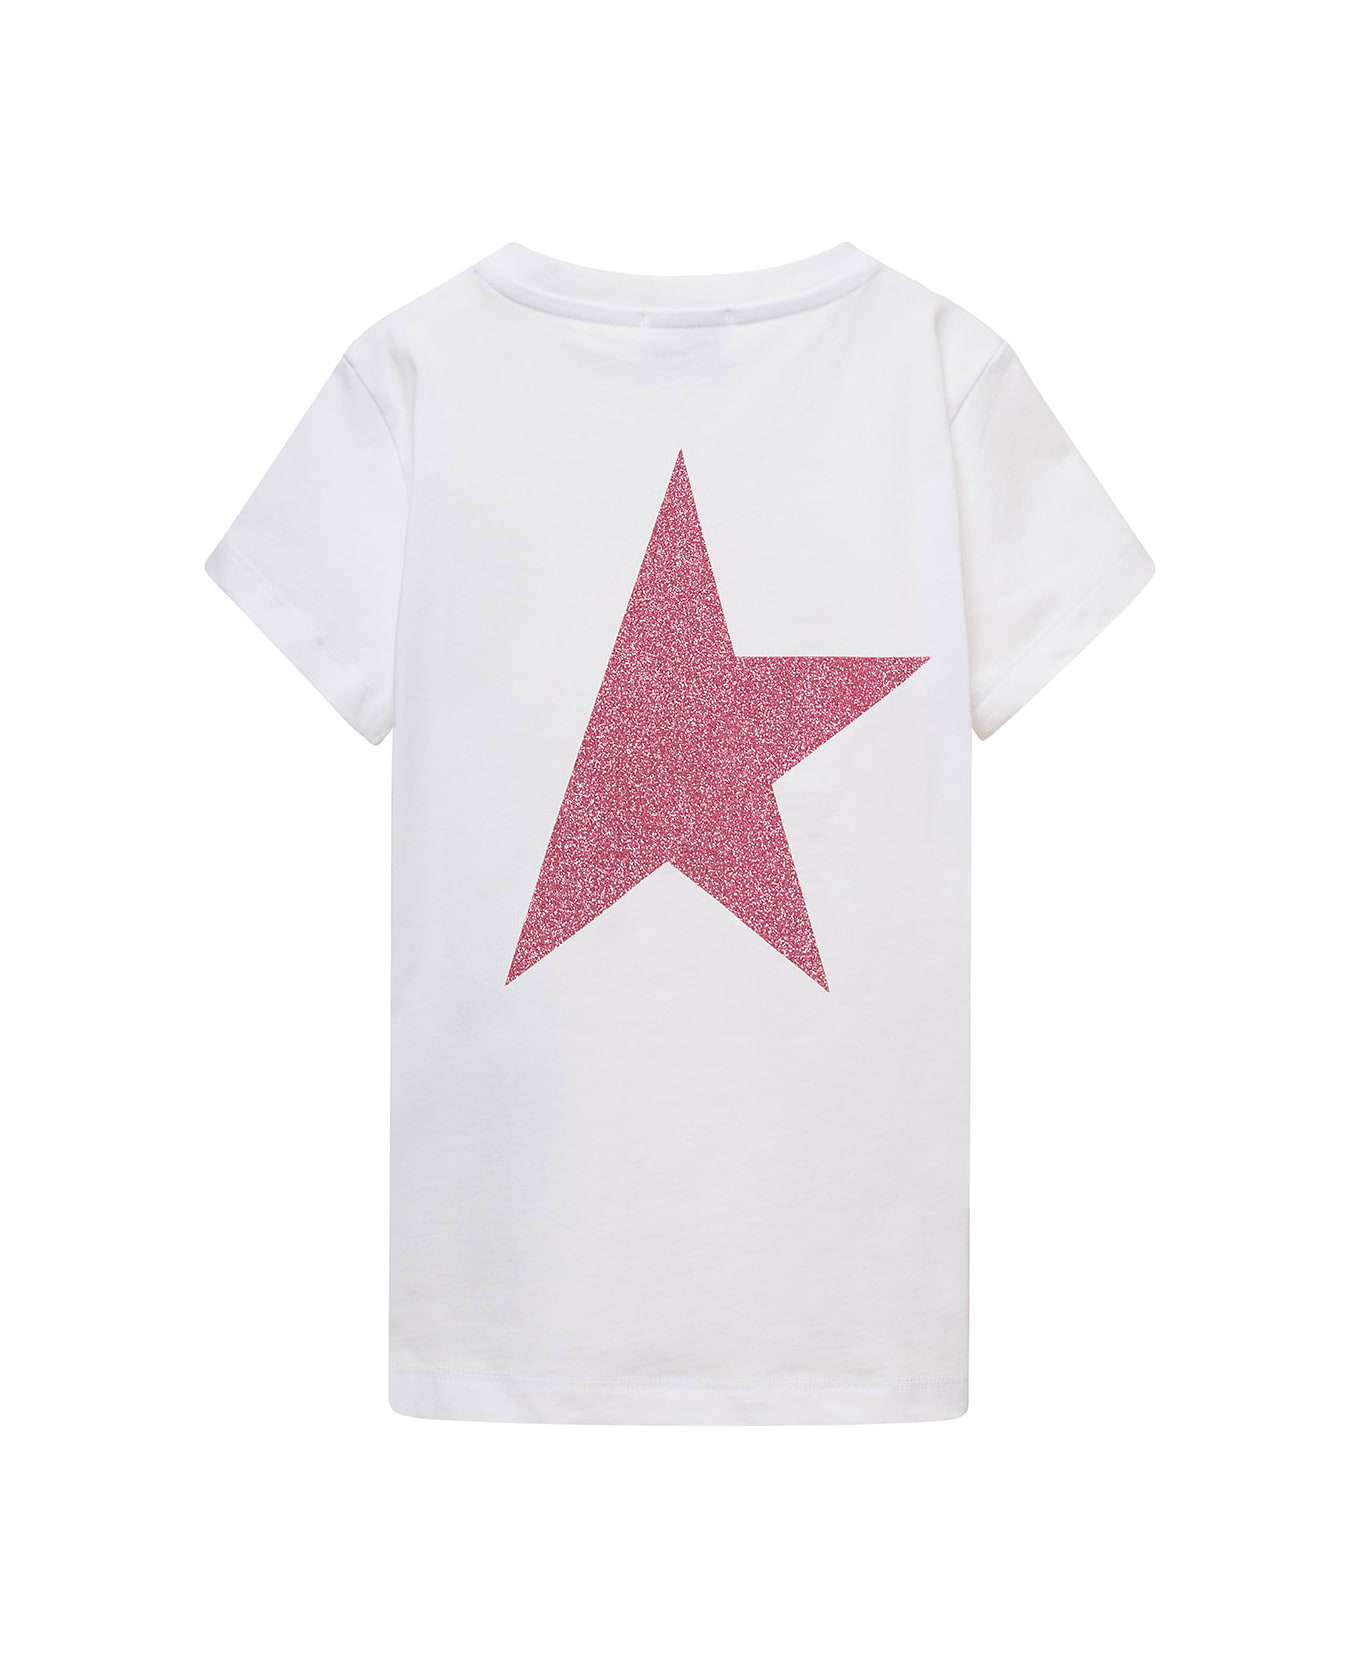 Golden Goose White Crewneck T-shirt With Contrasting Logo Lettering Print In Cotton Boy - White/pink